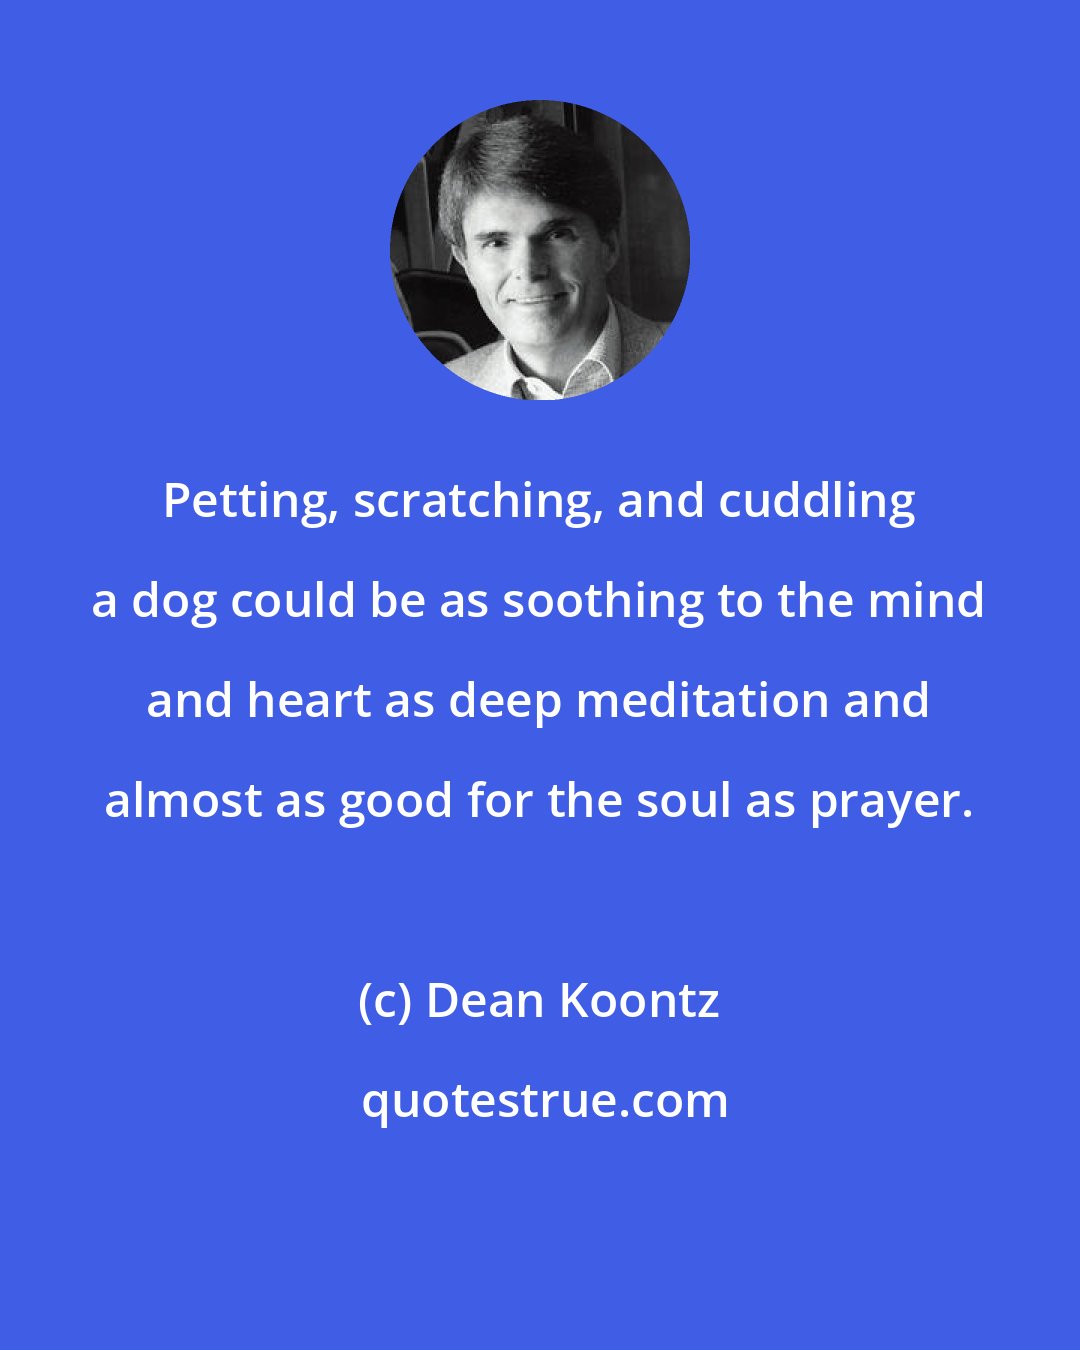 Dean Koontz: Petting, scratching, and cuddling a dog could be as soothing to the mind and heart as deep meditation and almost as good for the soul as prayer.